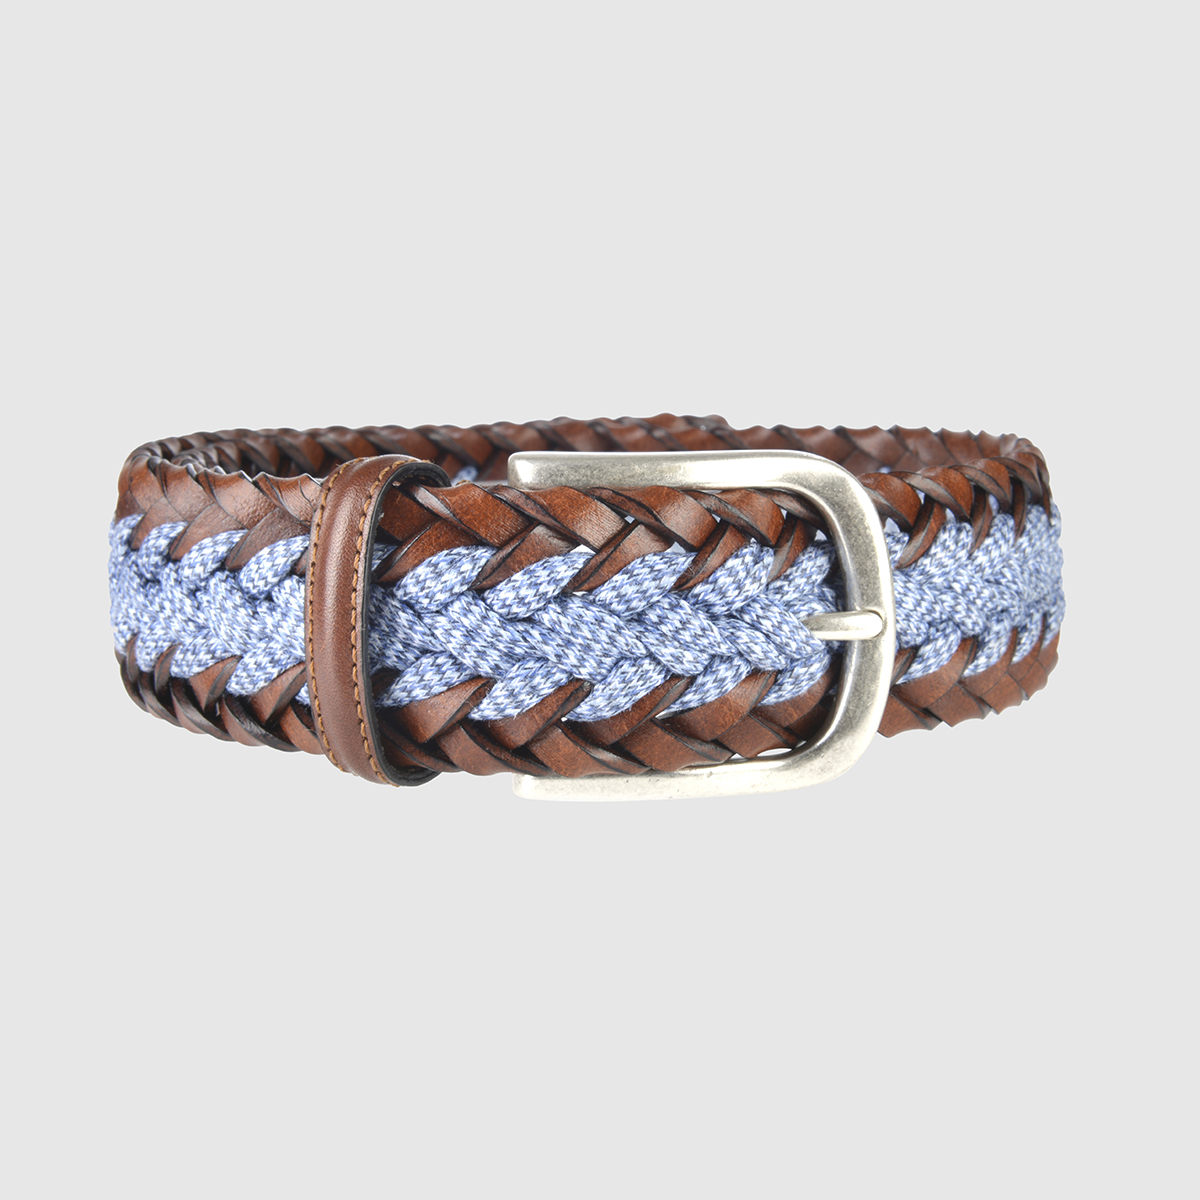 Light brown/Blue Jeans Woven Leather Belt – XS-S